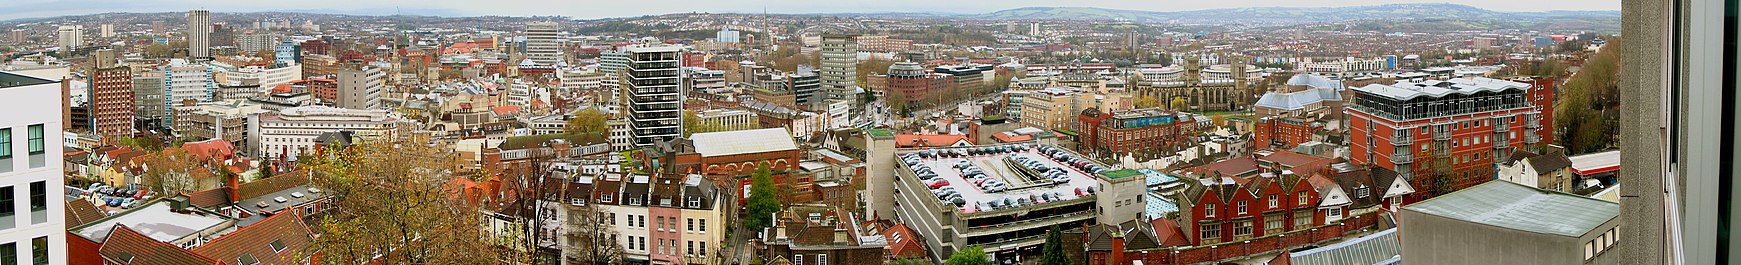 A panoramic view looking over a cityscape of office blocks, old buildings, church spires and a multi-story car park. In the distance are hills.